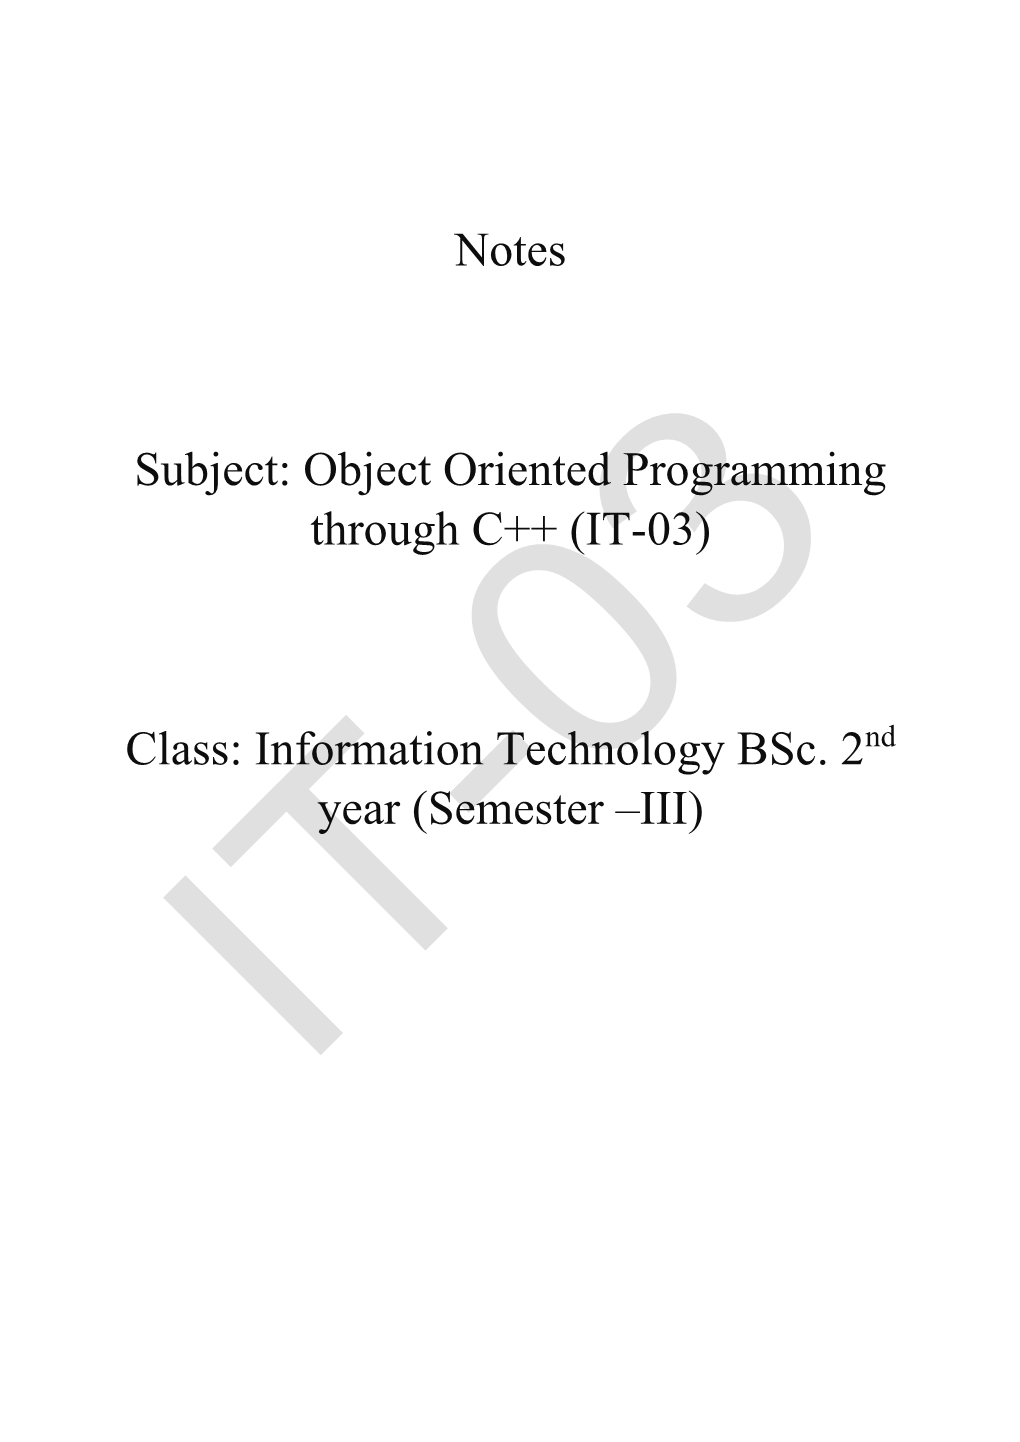 Object Oriented Programming Through C++ (IT-03) Class